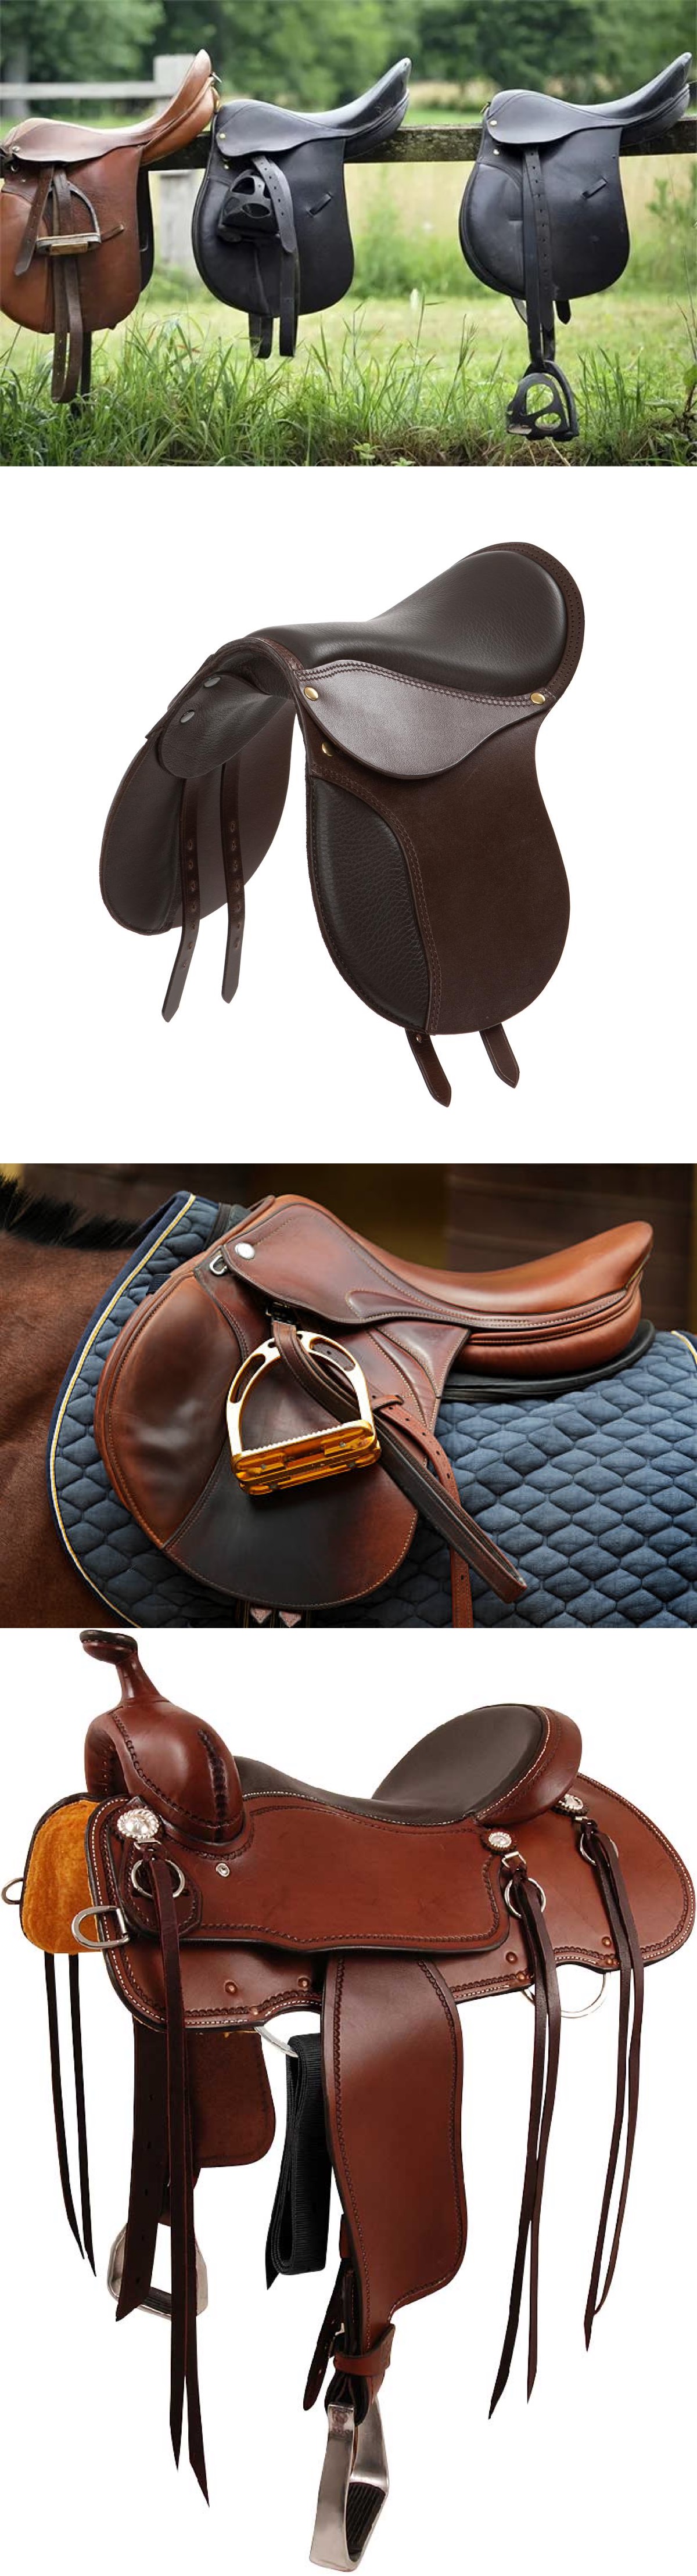 Durable Microfiber Faux Suede Leather Fabric for Horse Saddles